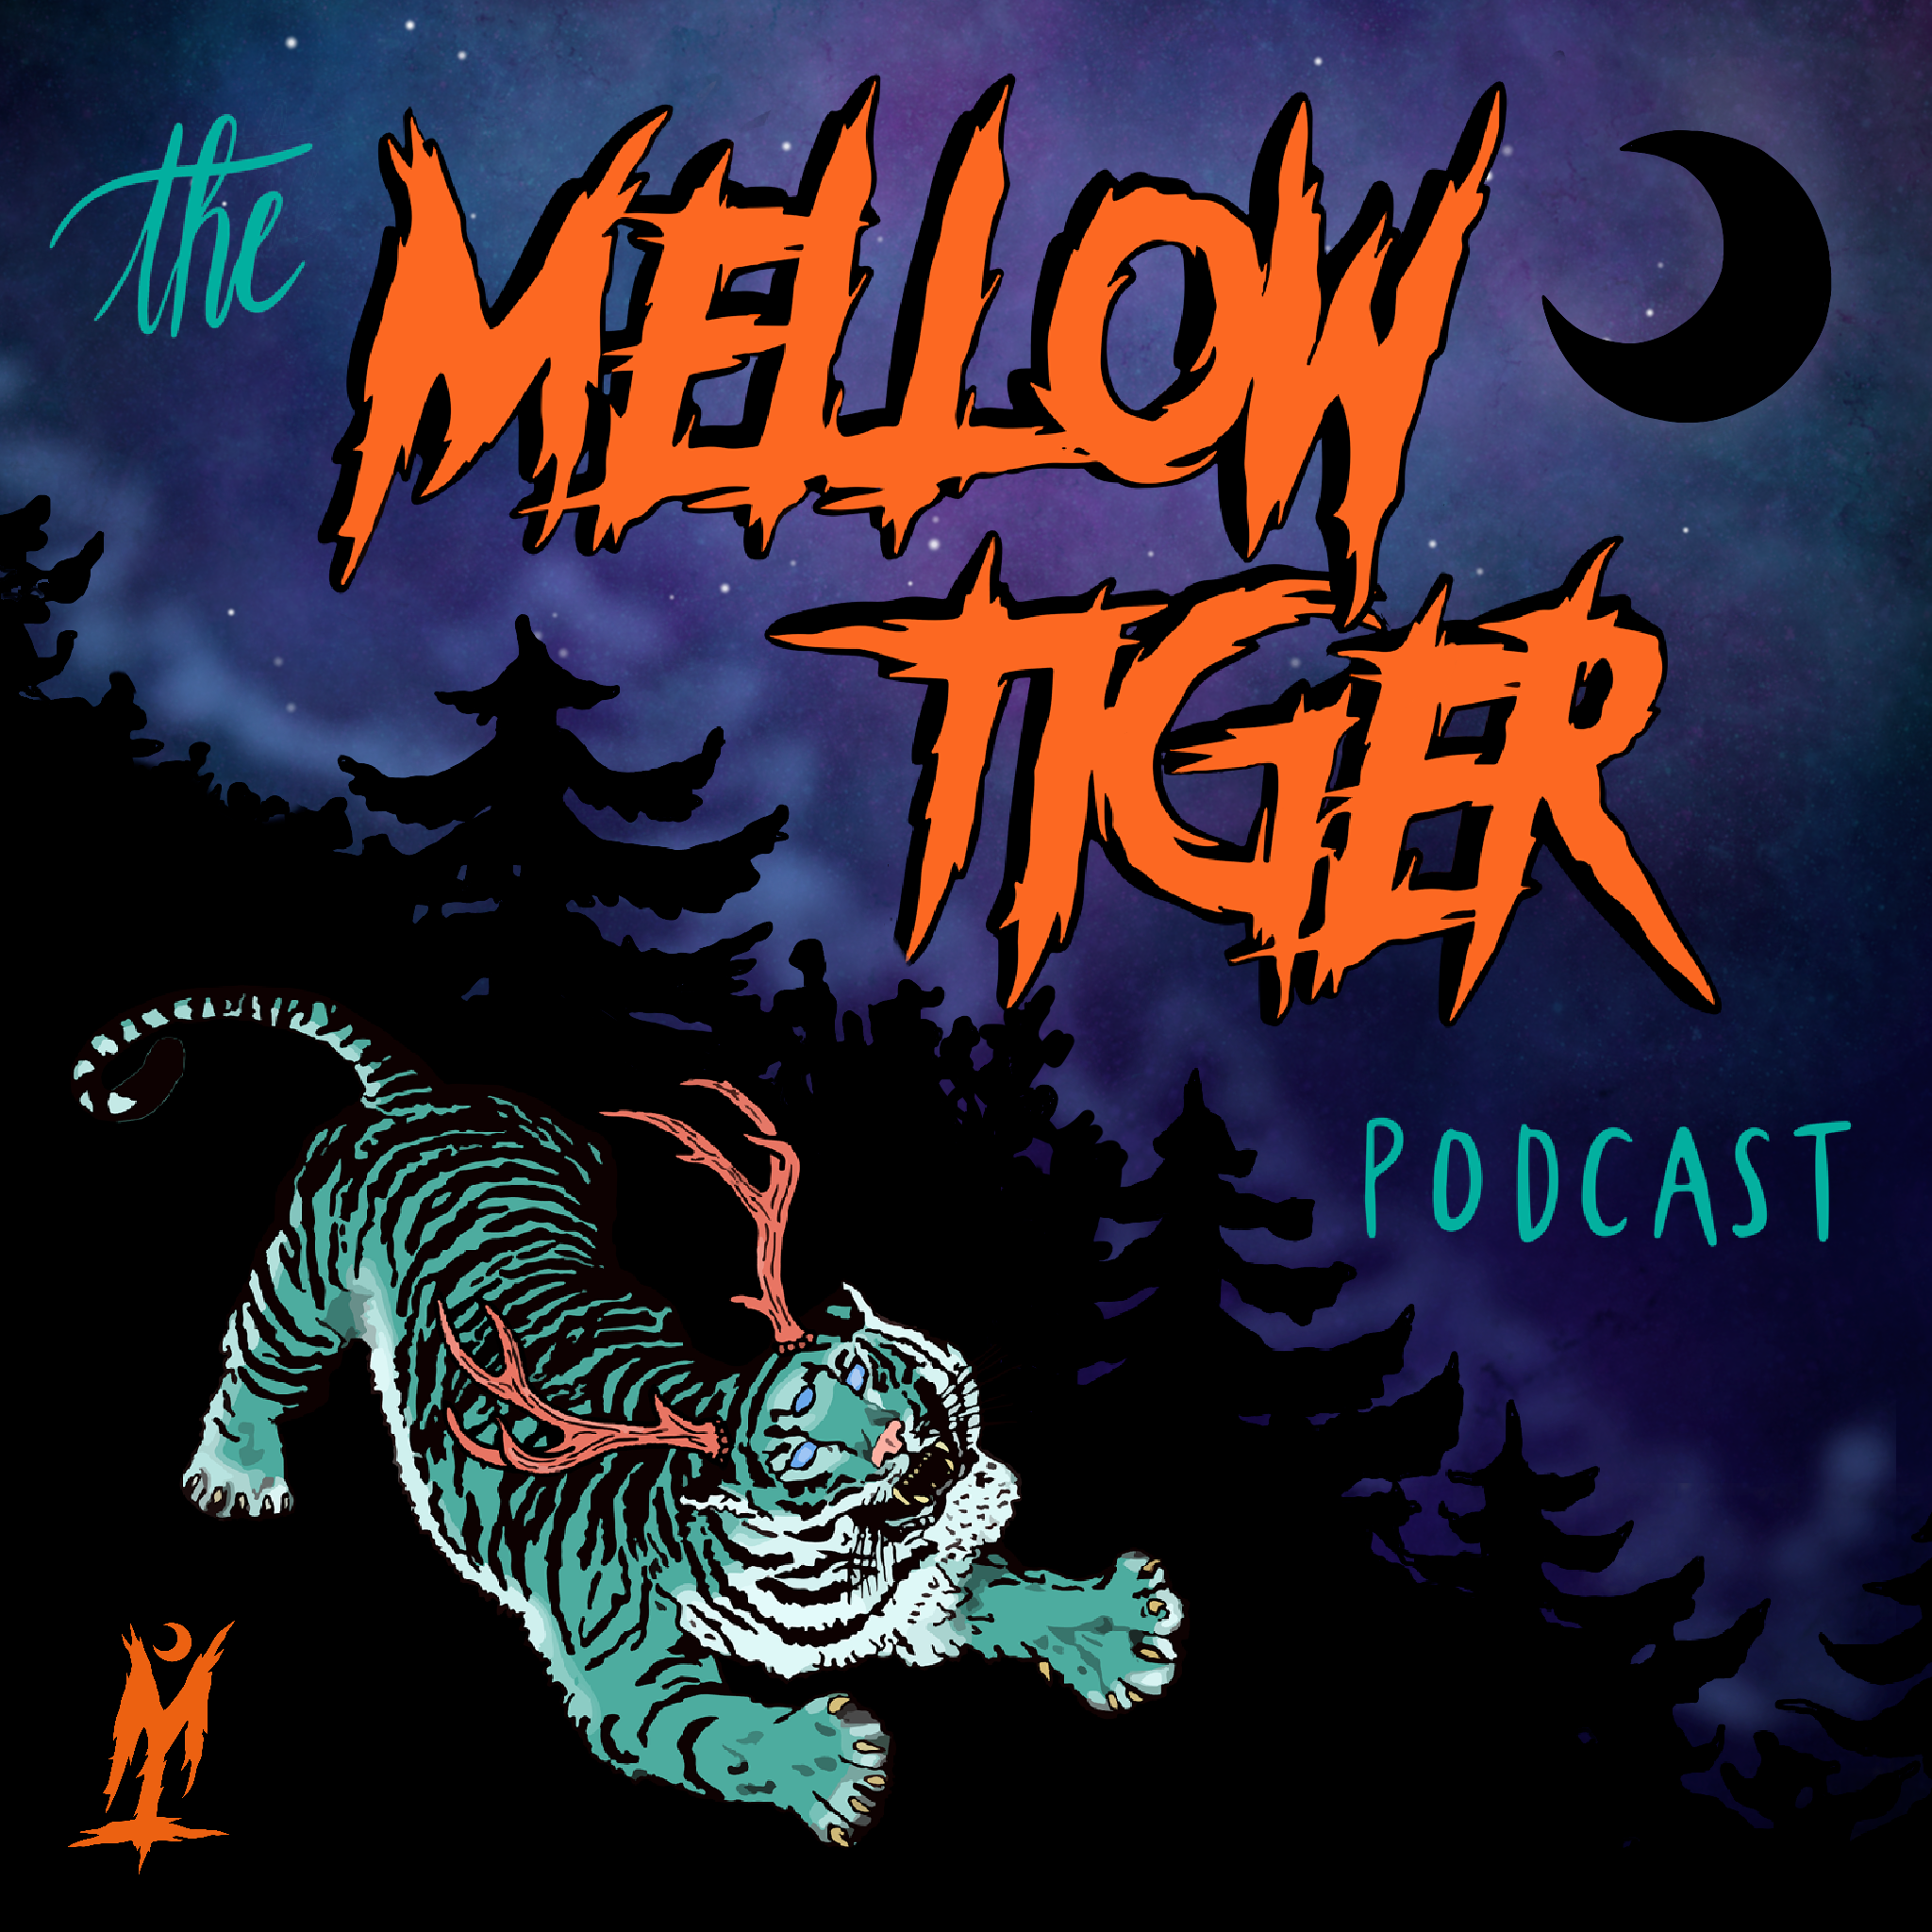 The Mellow Tiger Podcast